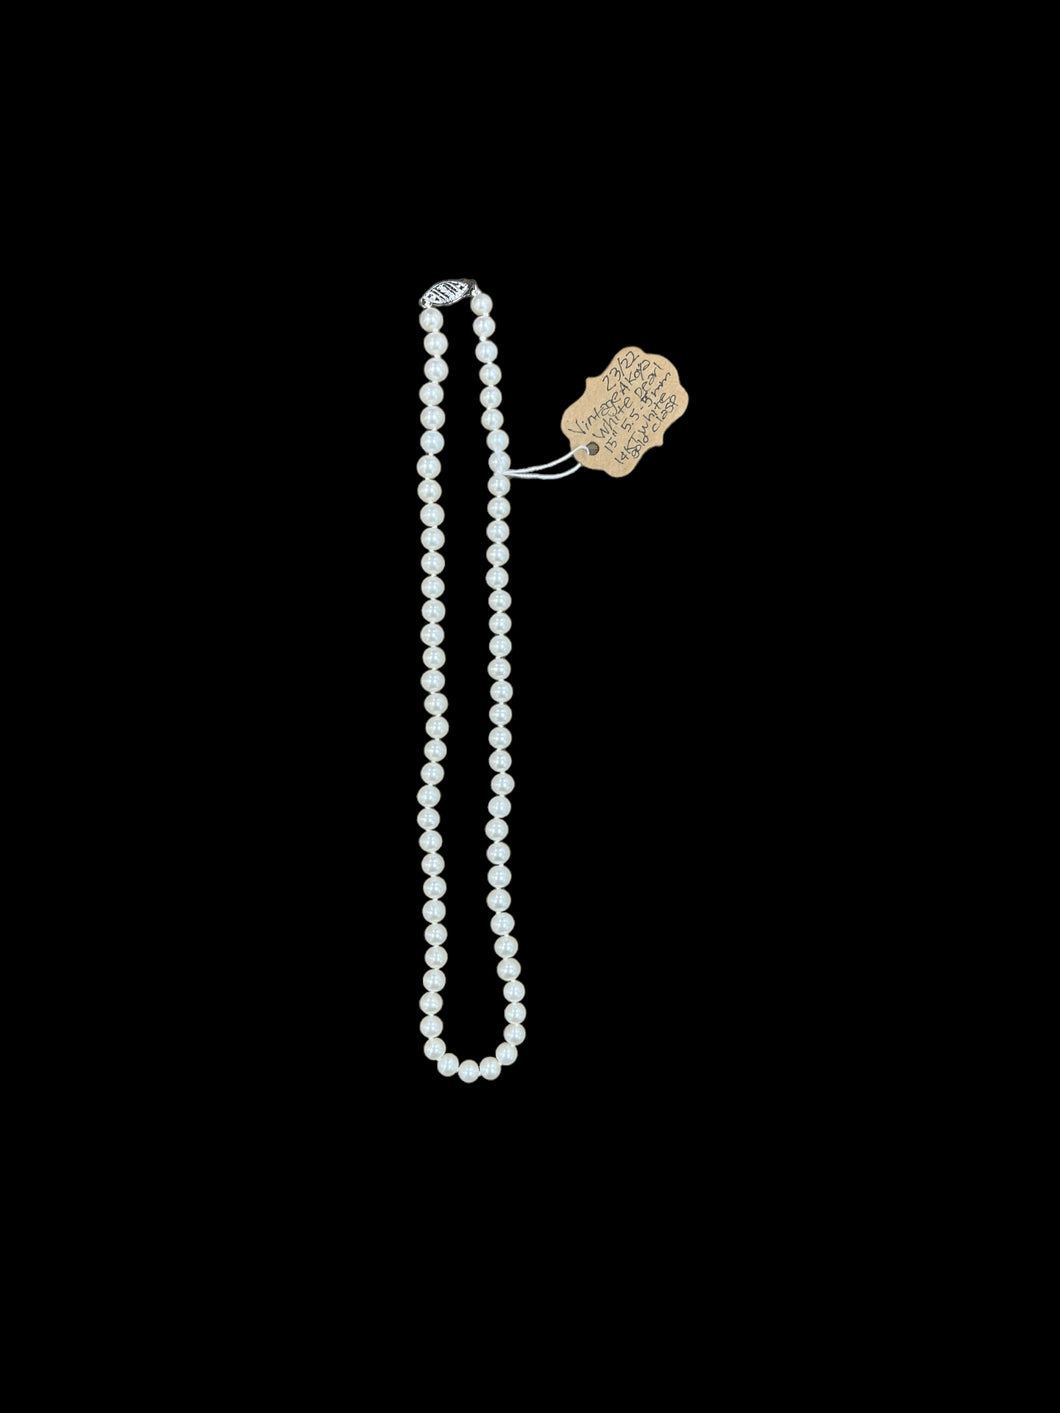 23/22 Akoya Cultured Pearls with 14k white gold clasp